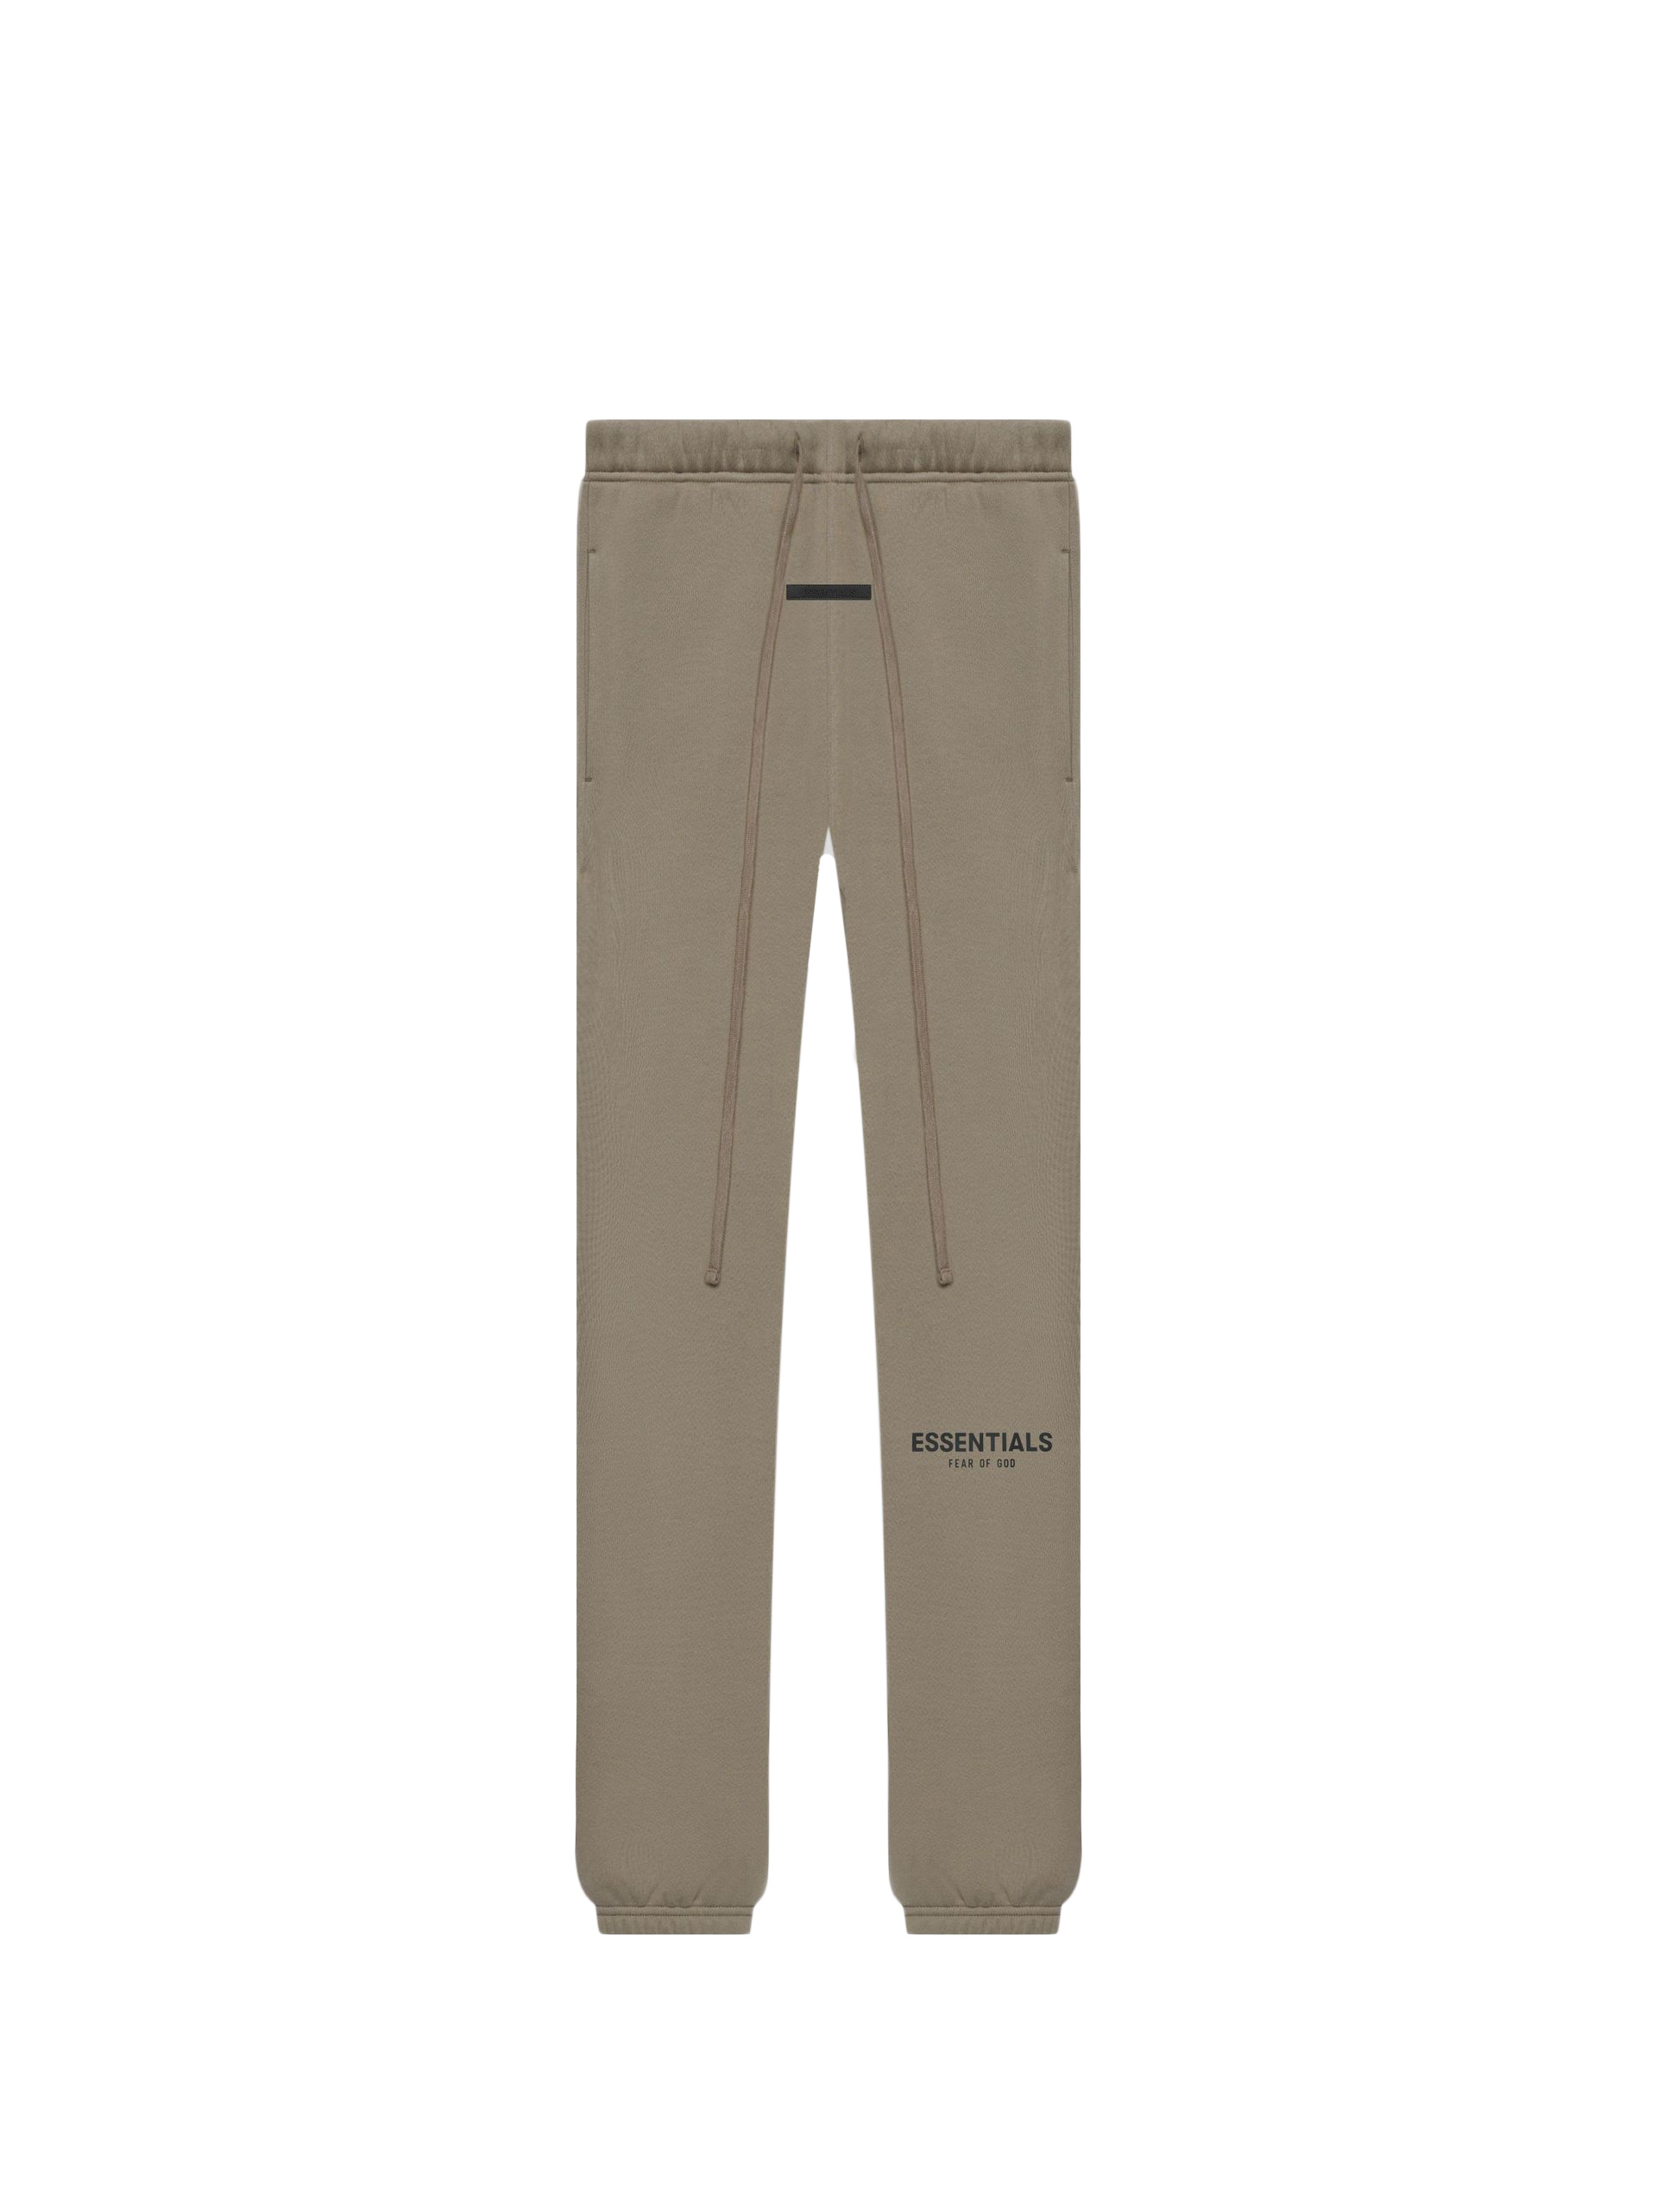 Fear of God Essentials Sweatpants (SS21) Taupe - SS21 - US